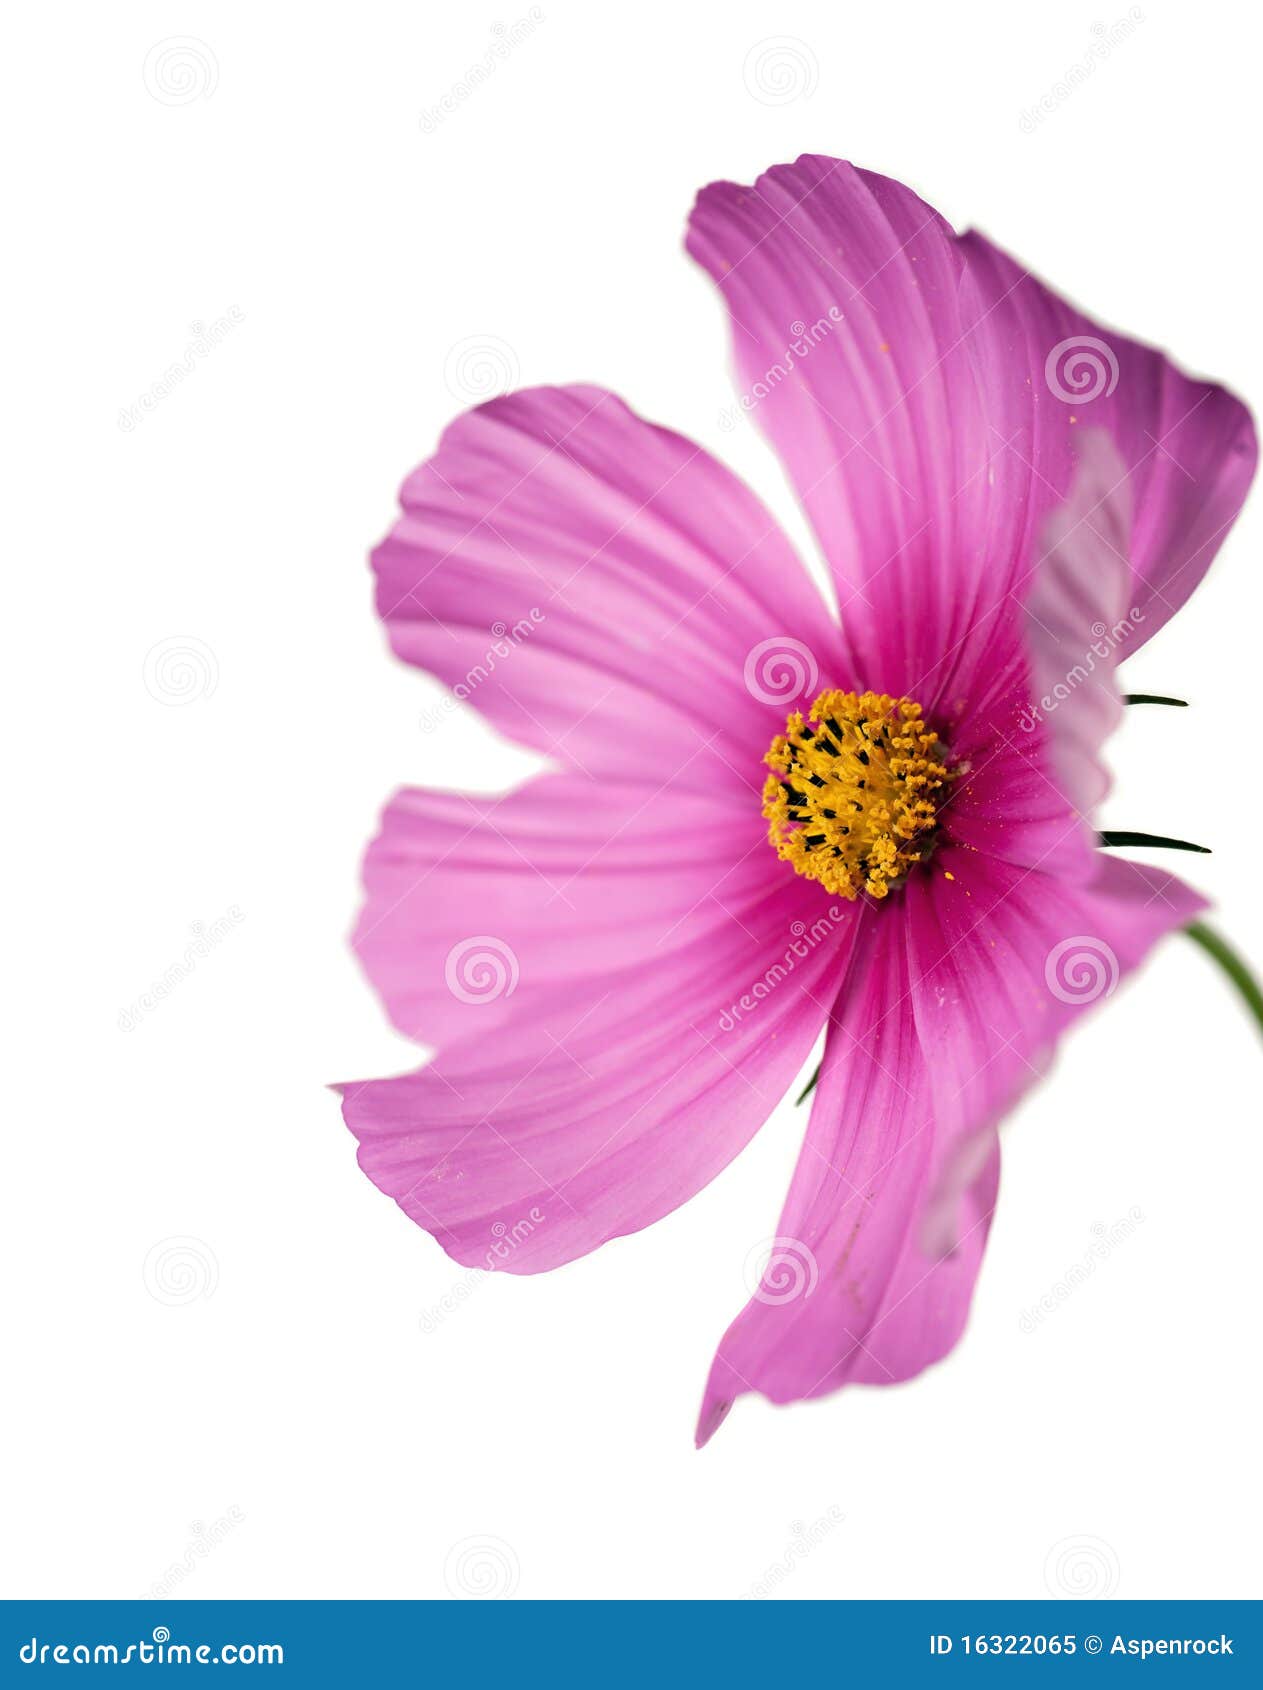  pink/purple cosmo on white